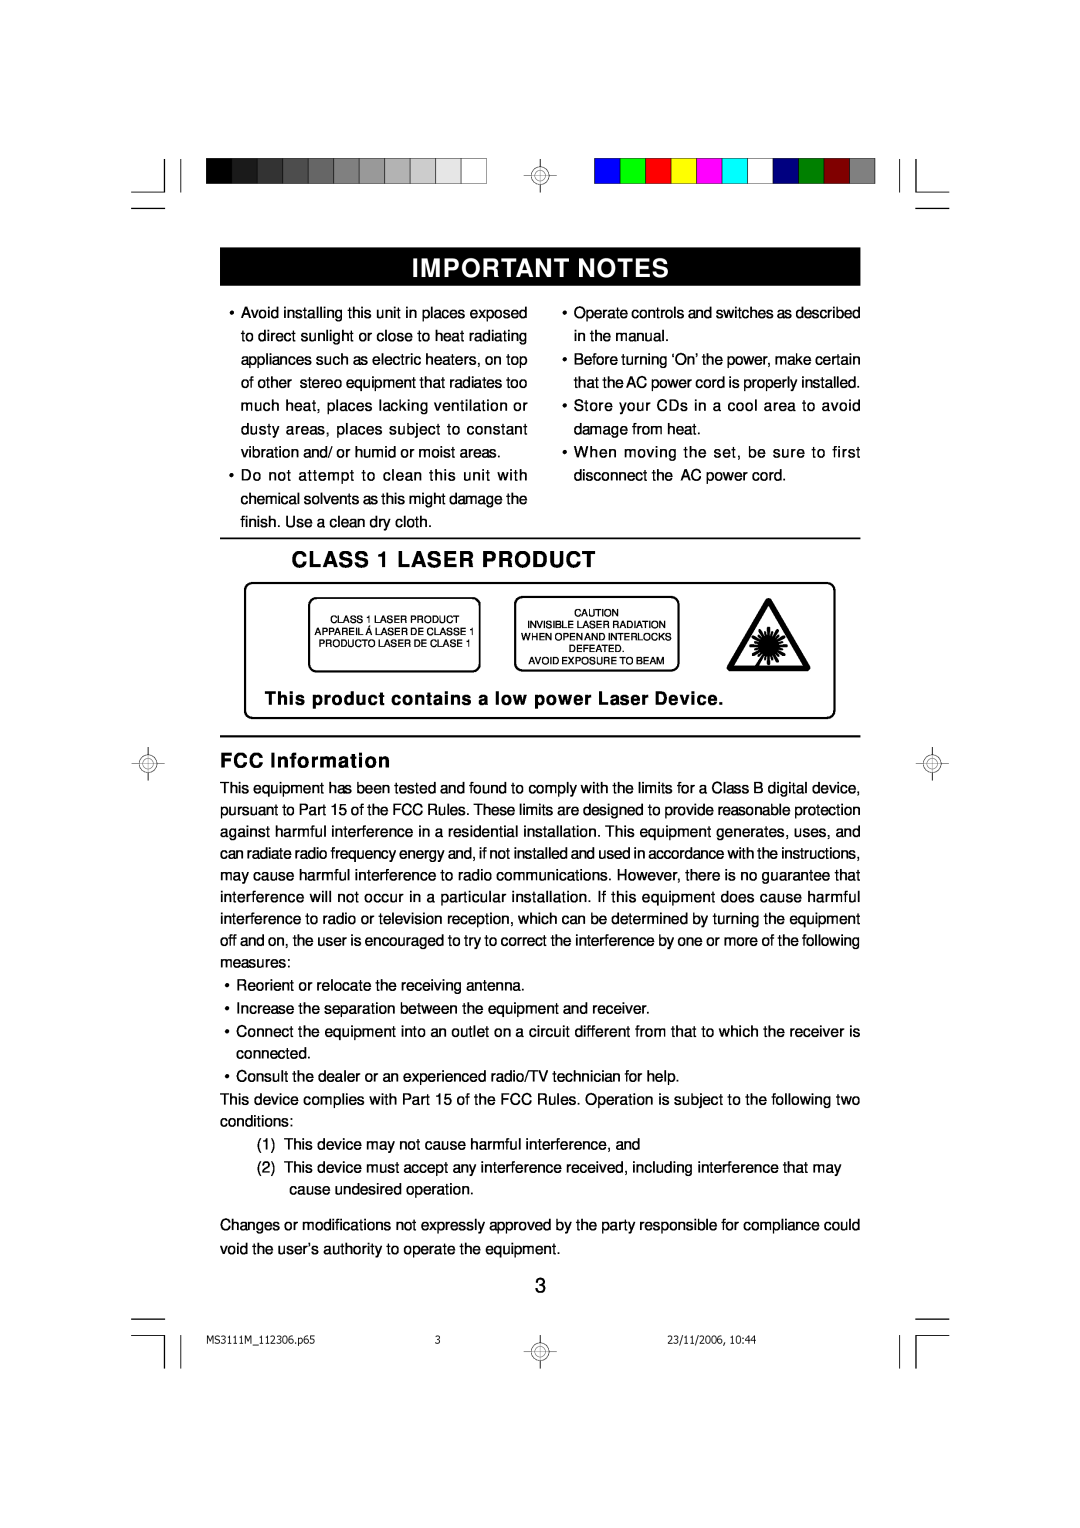 Emerson MS3111M owner manual Important Notes, CLASS 1 LASER PRODUCT, FCC Information 